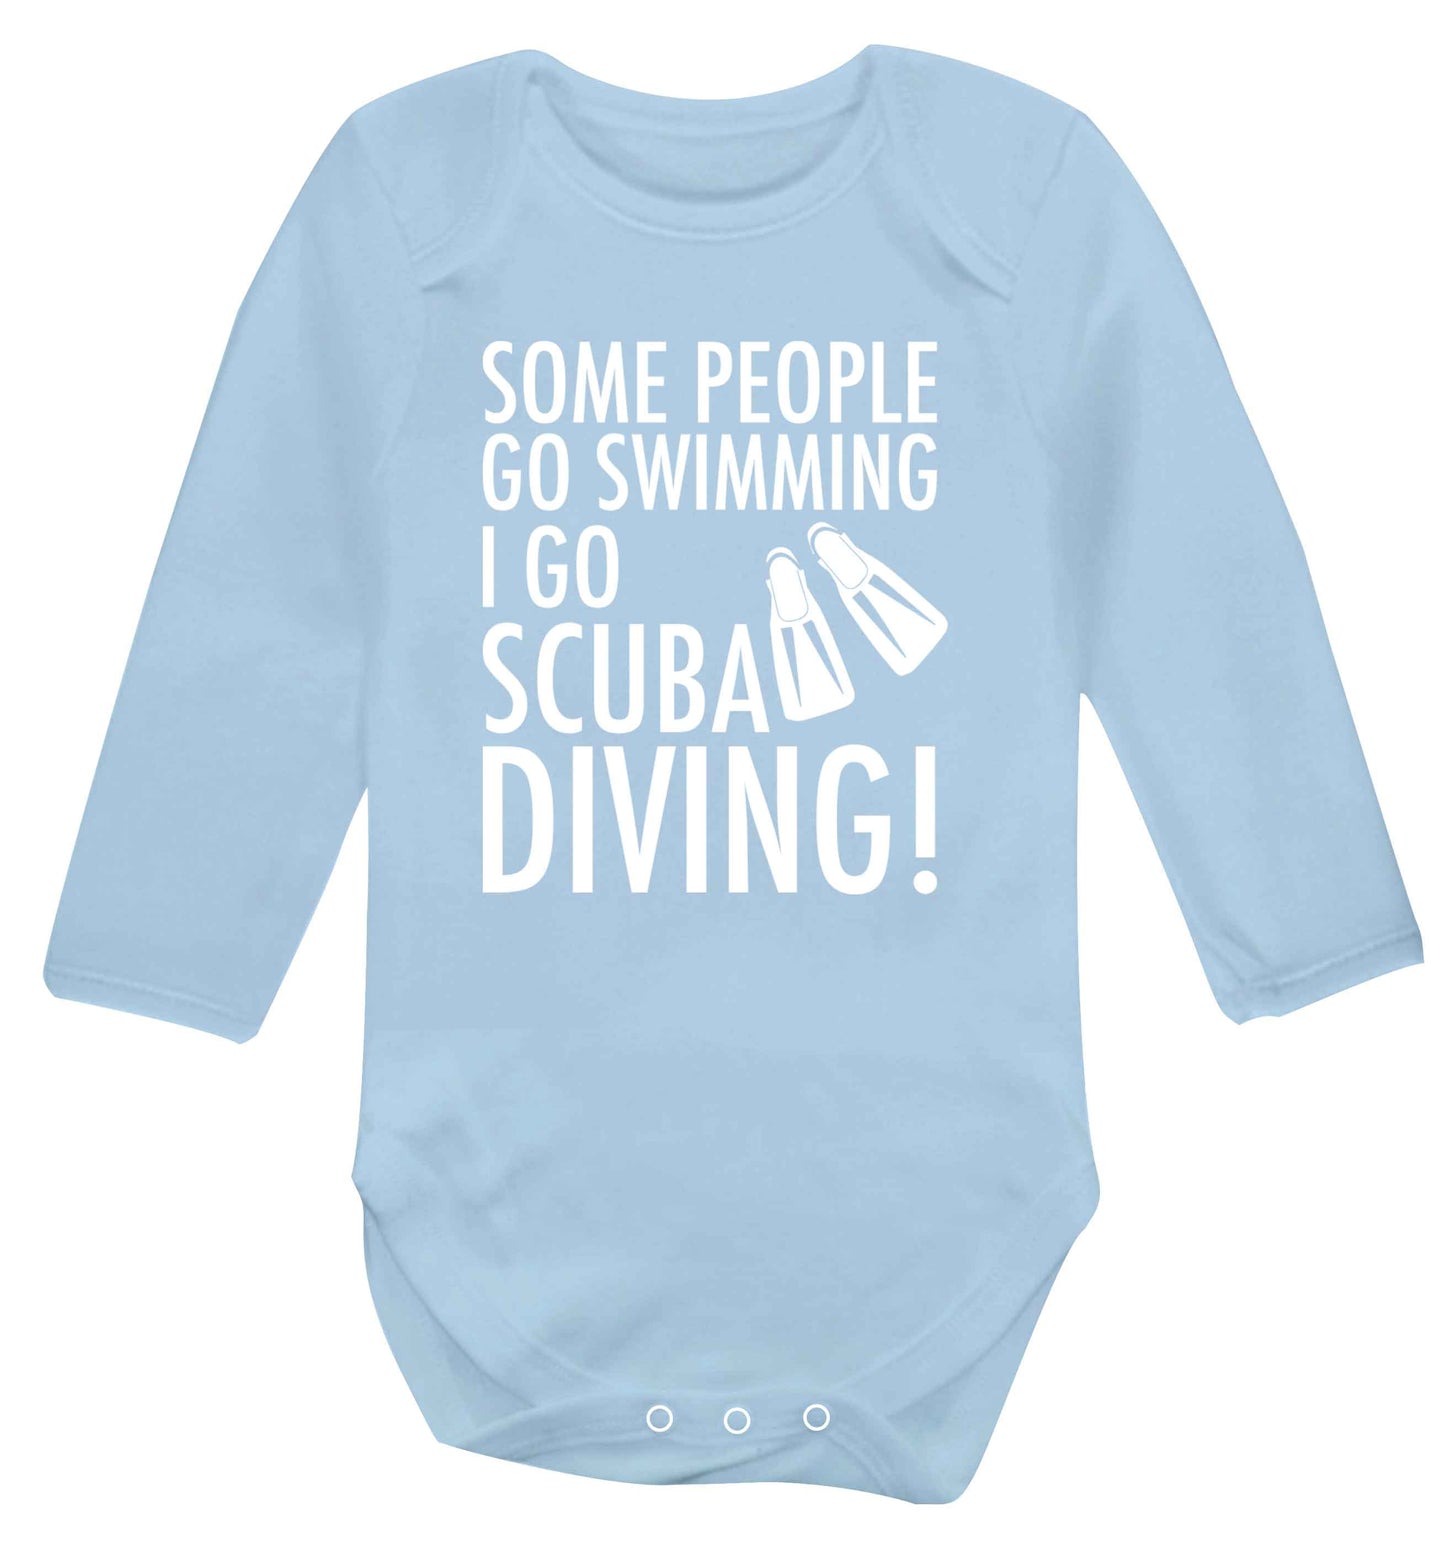 Some people go swimming I go scuba diving! Baby Vest long sleeved pale blue 6-12 months